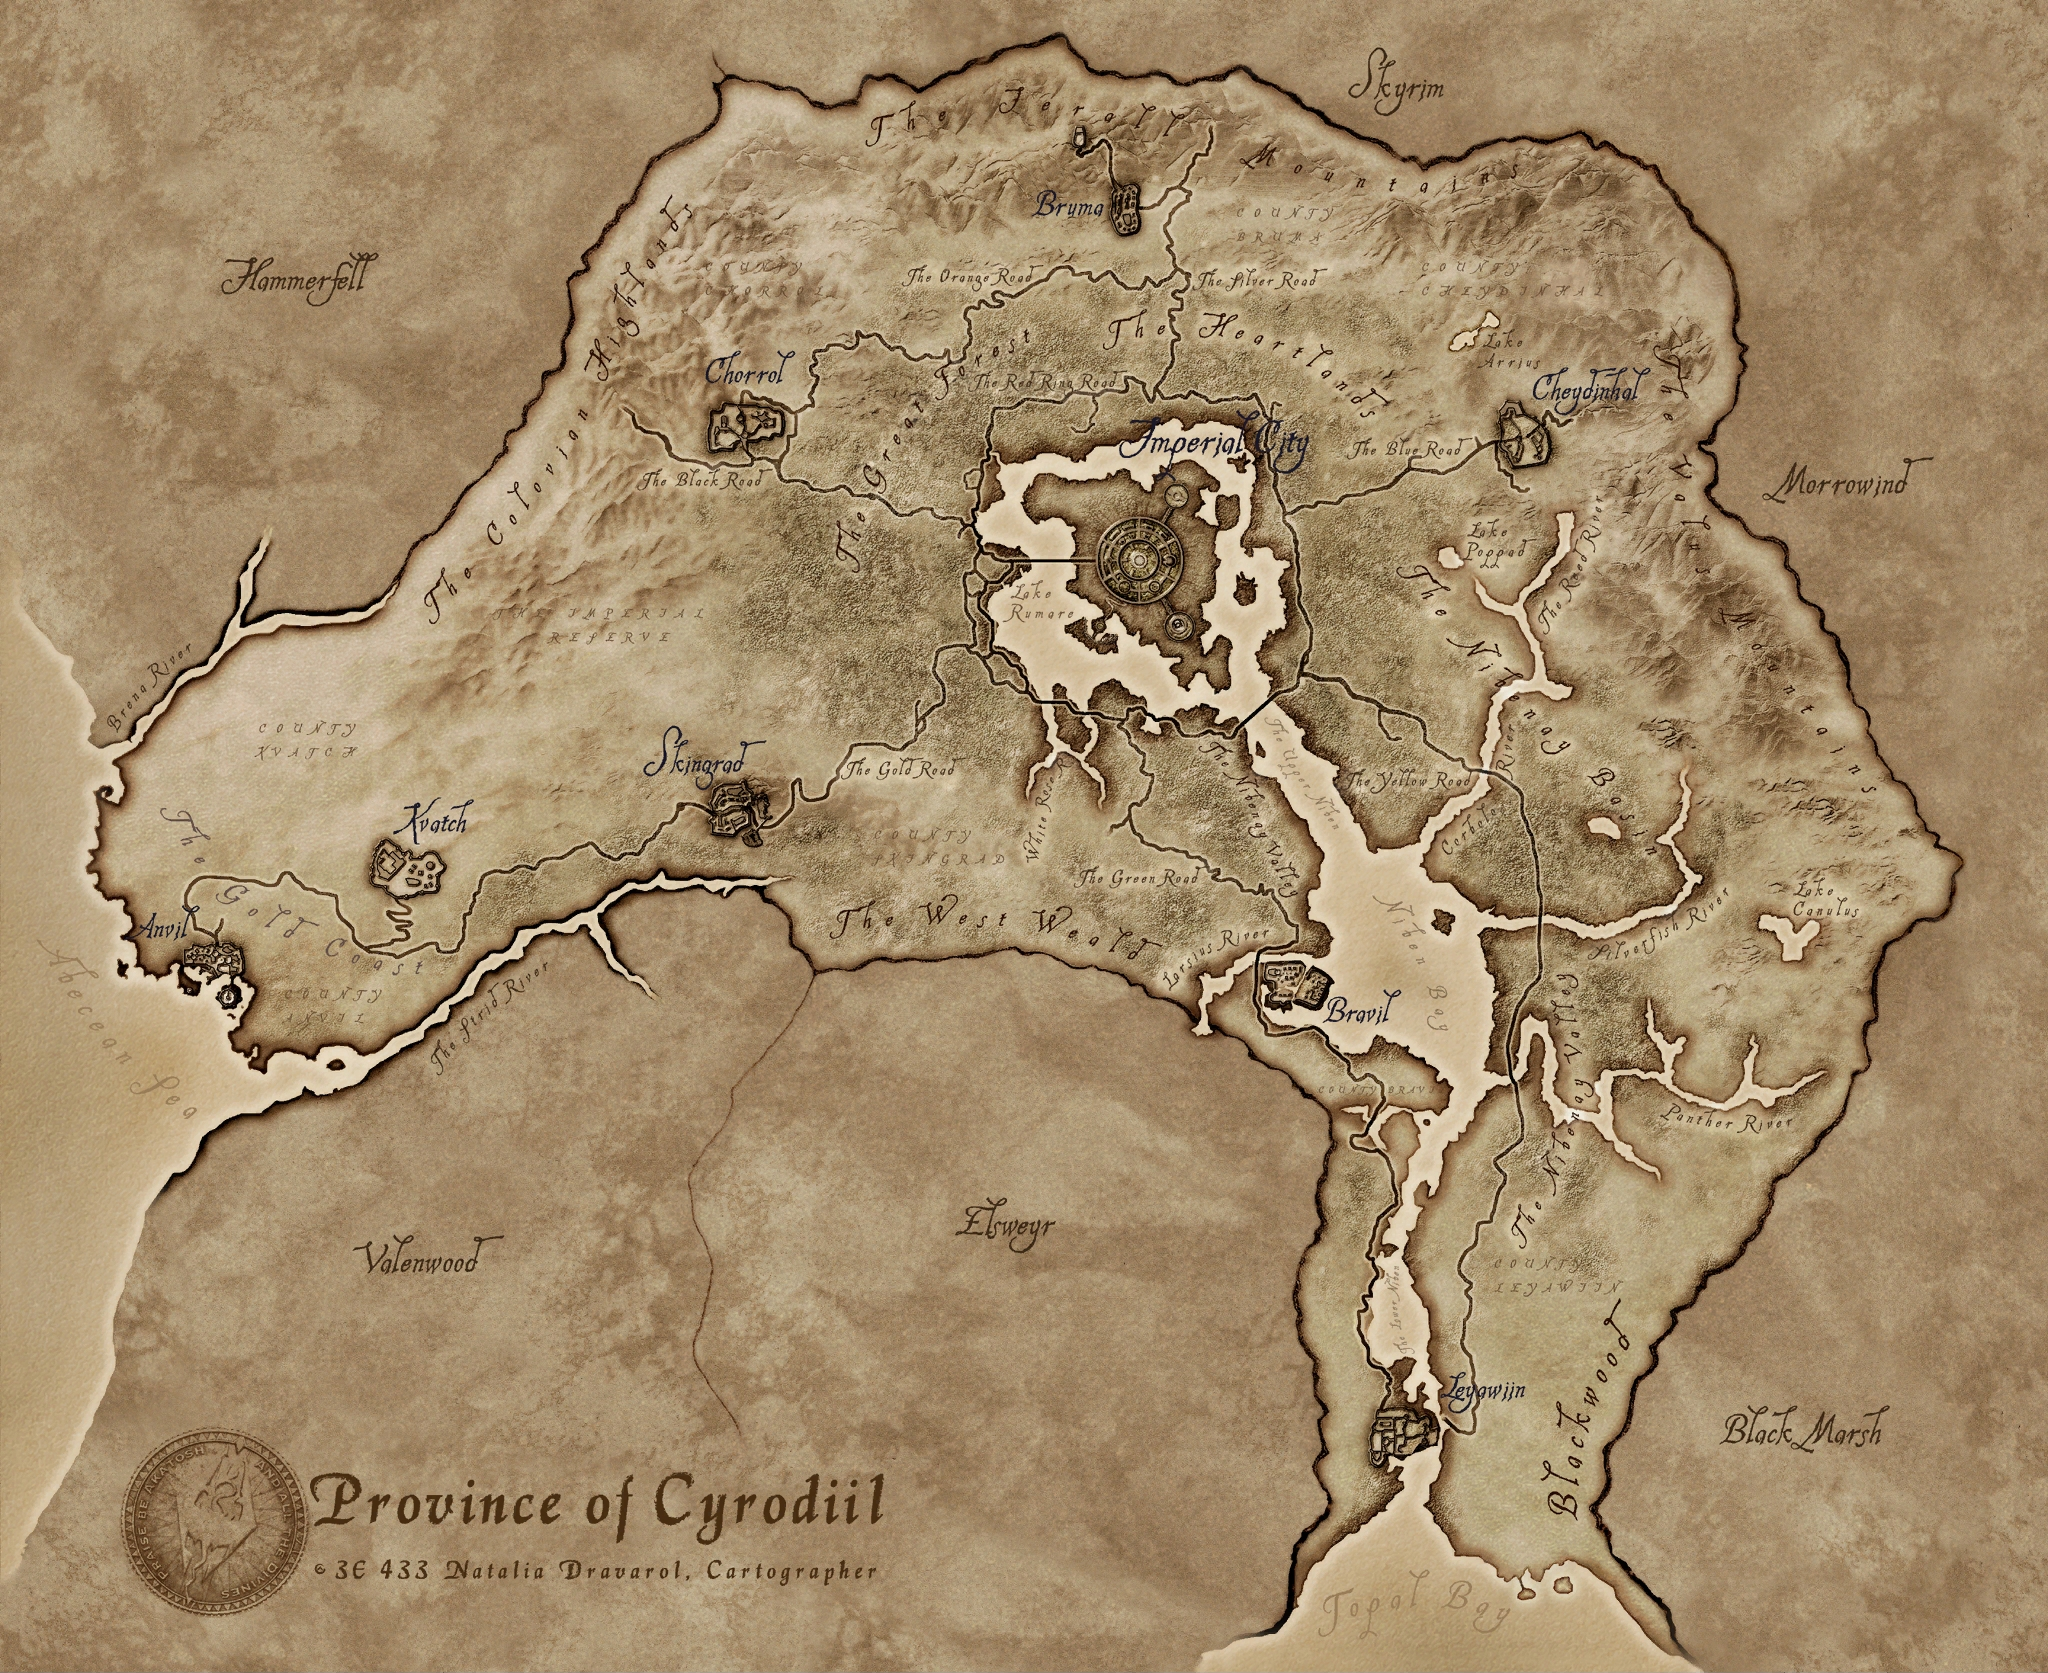 Lost Law of Tamriel journal pages inspired by the Elder scrolls and Skyrim 